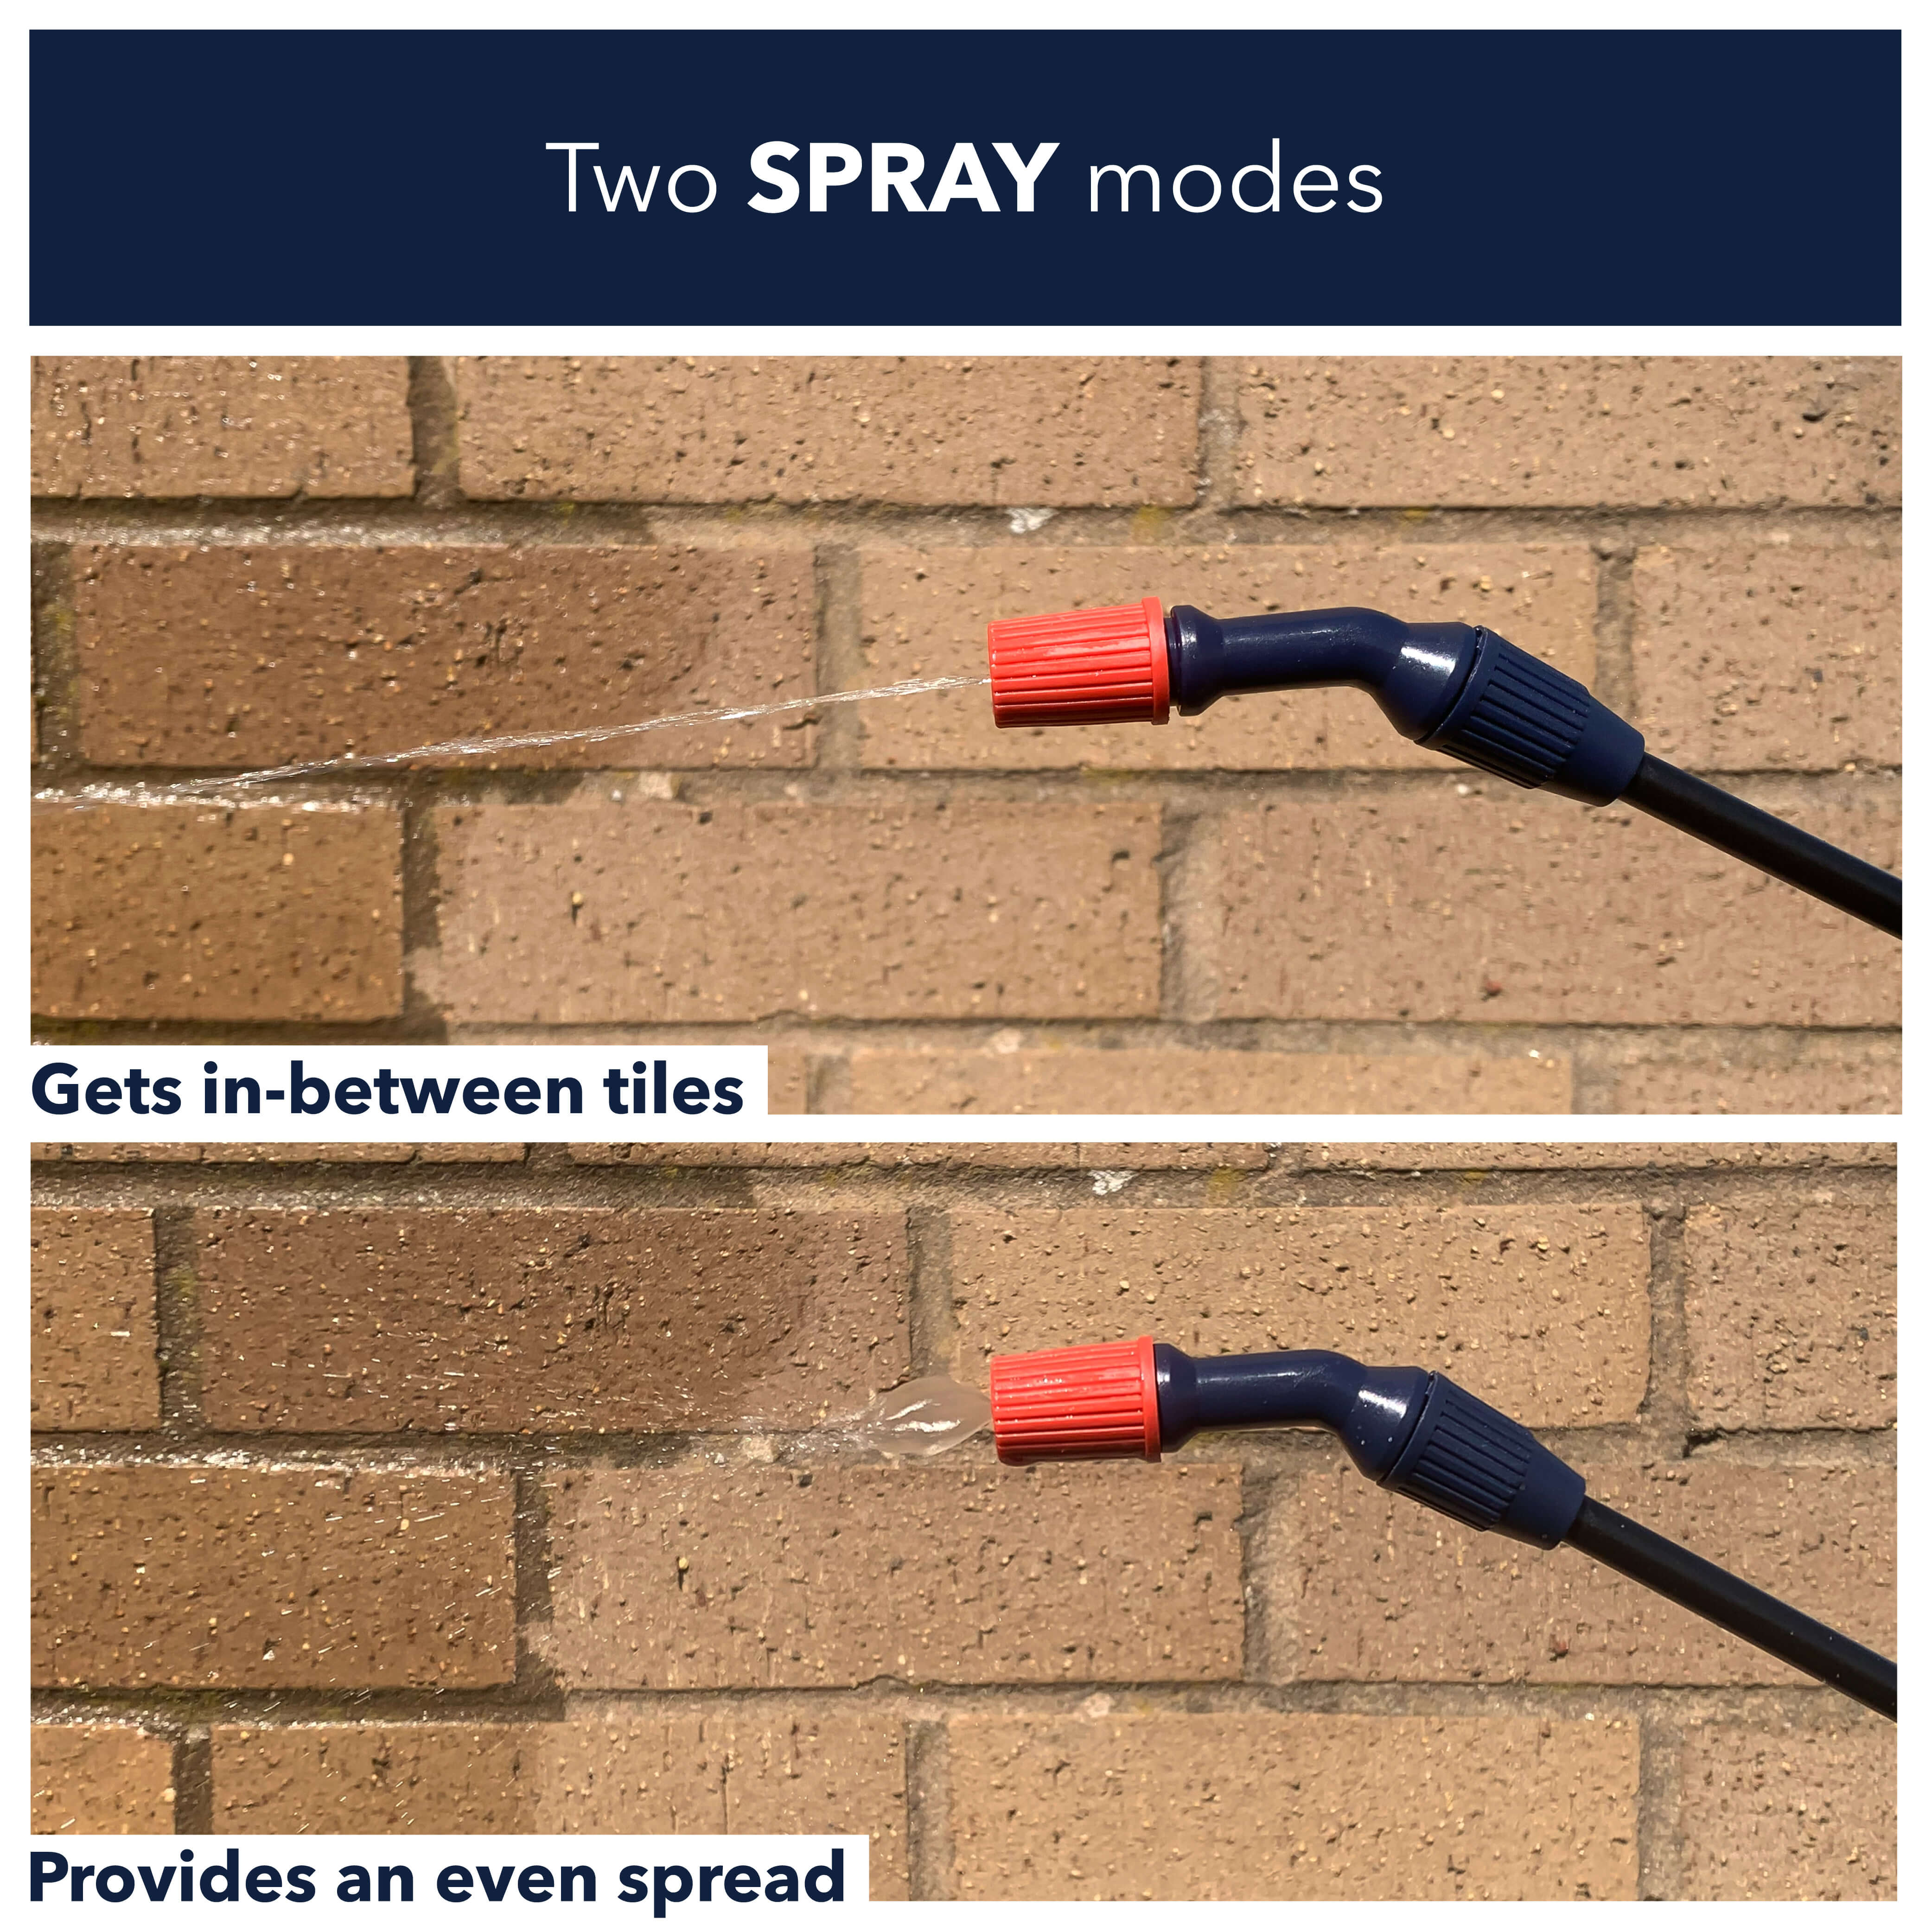 Two spray modes, one gets in-between tiles the other provides an even spread